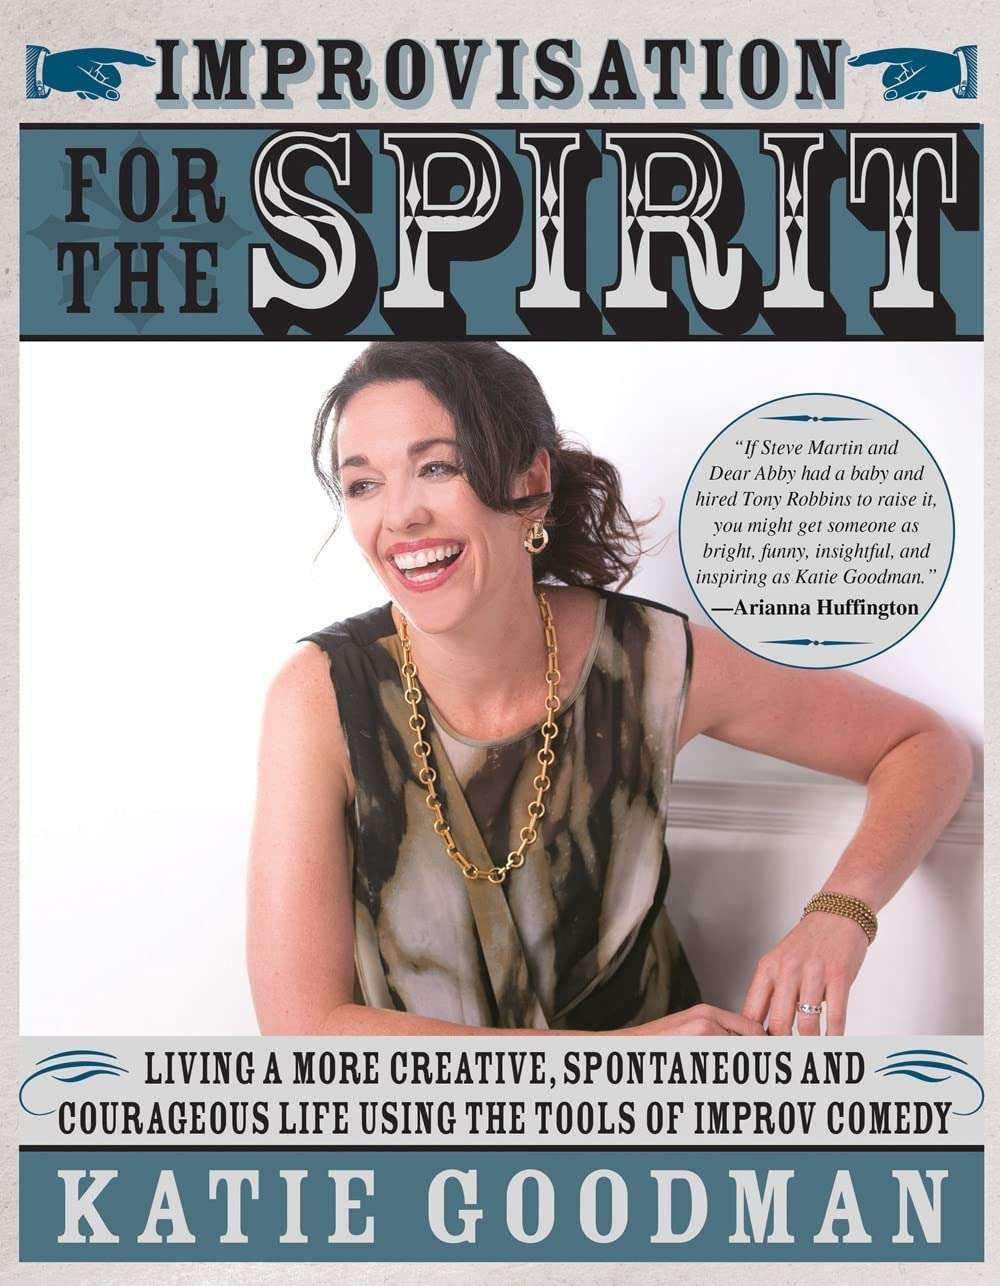 The cover of improvisation for the spirit by kate goodman.